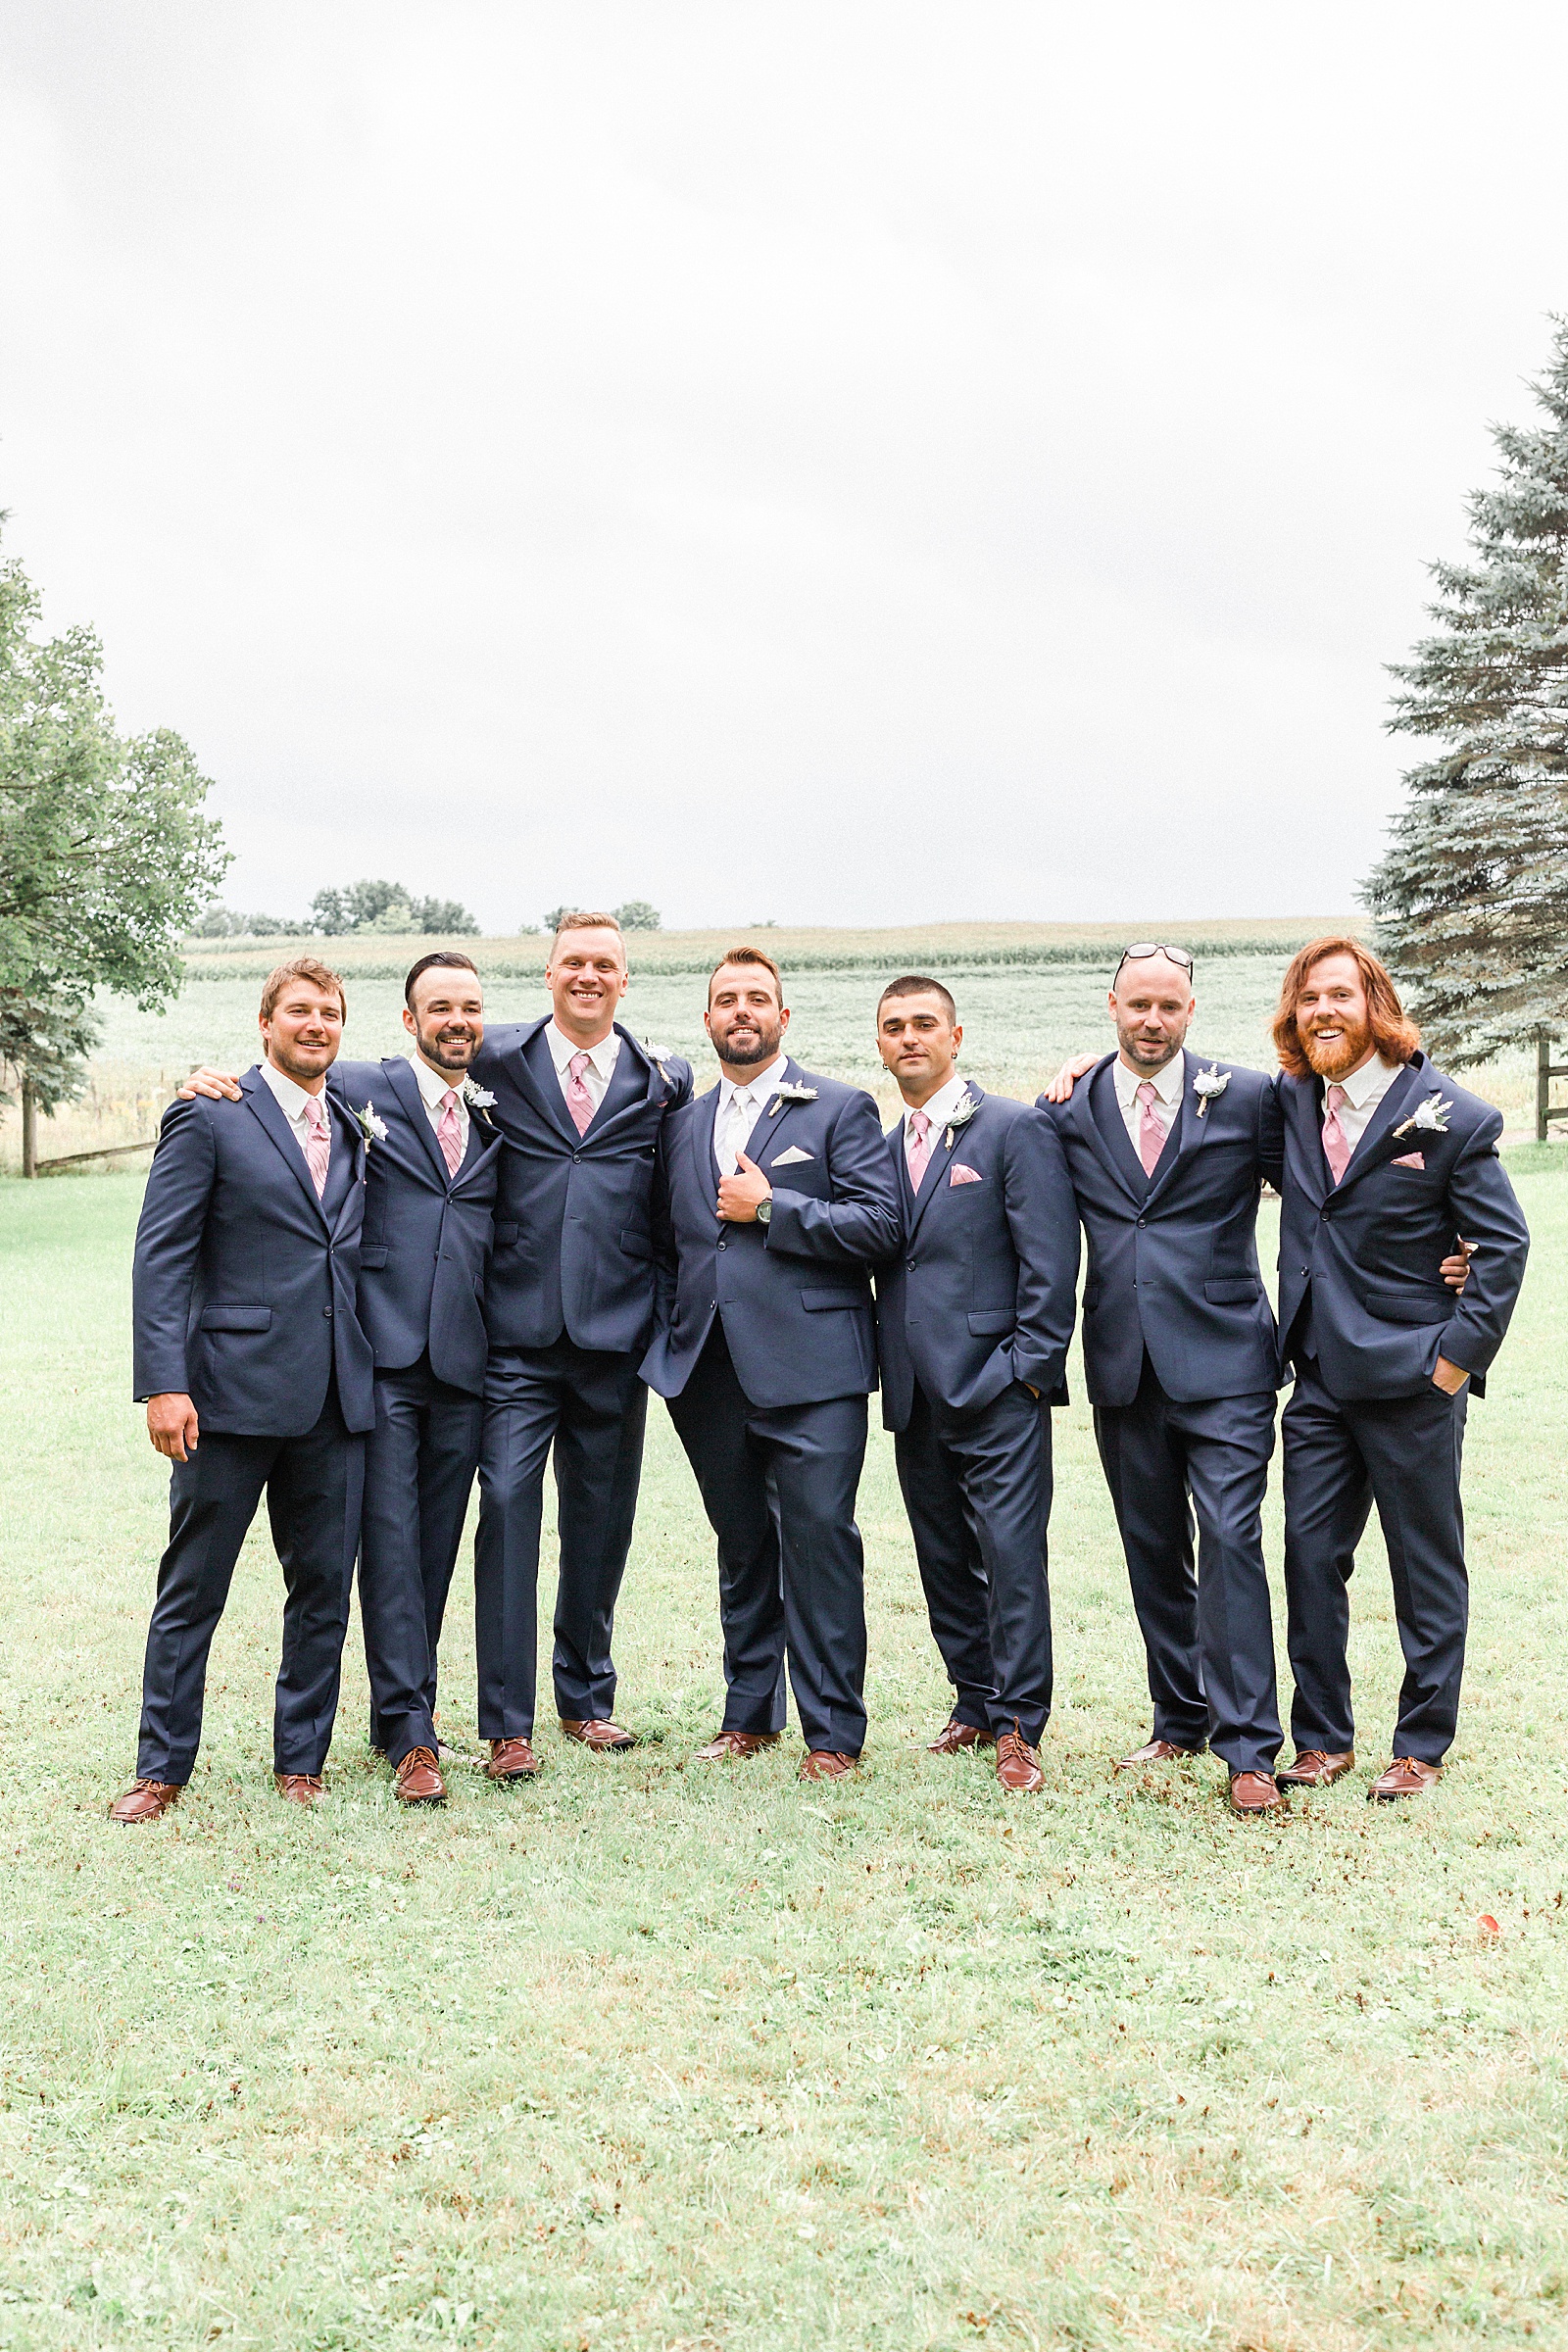 St Jacob's Ontario wedding with a blush and navy coloured theme